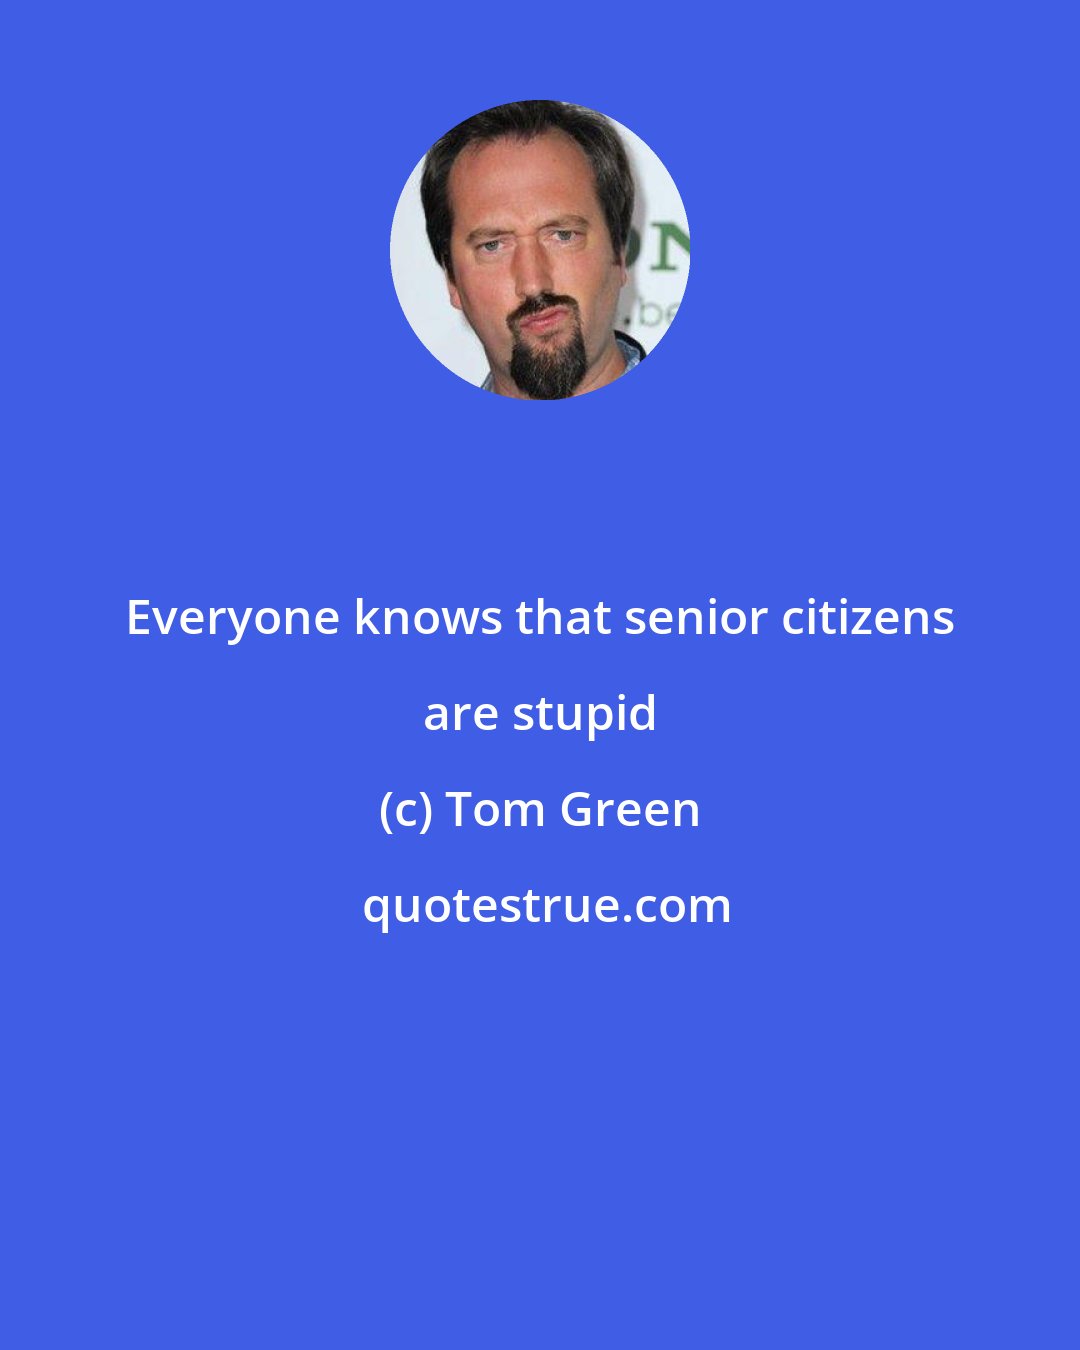 Tom Green: Everyone knows that senior citizens are stupid